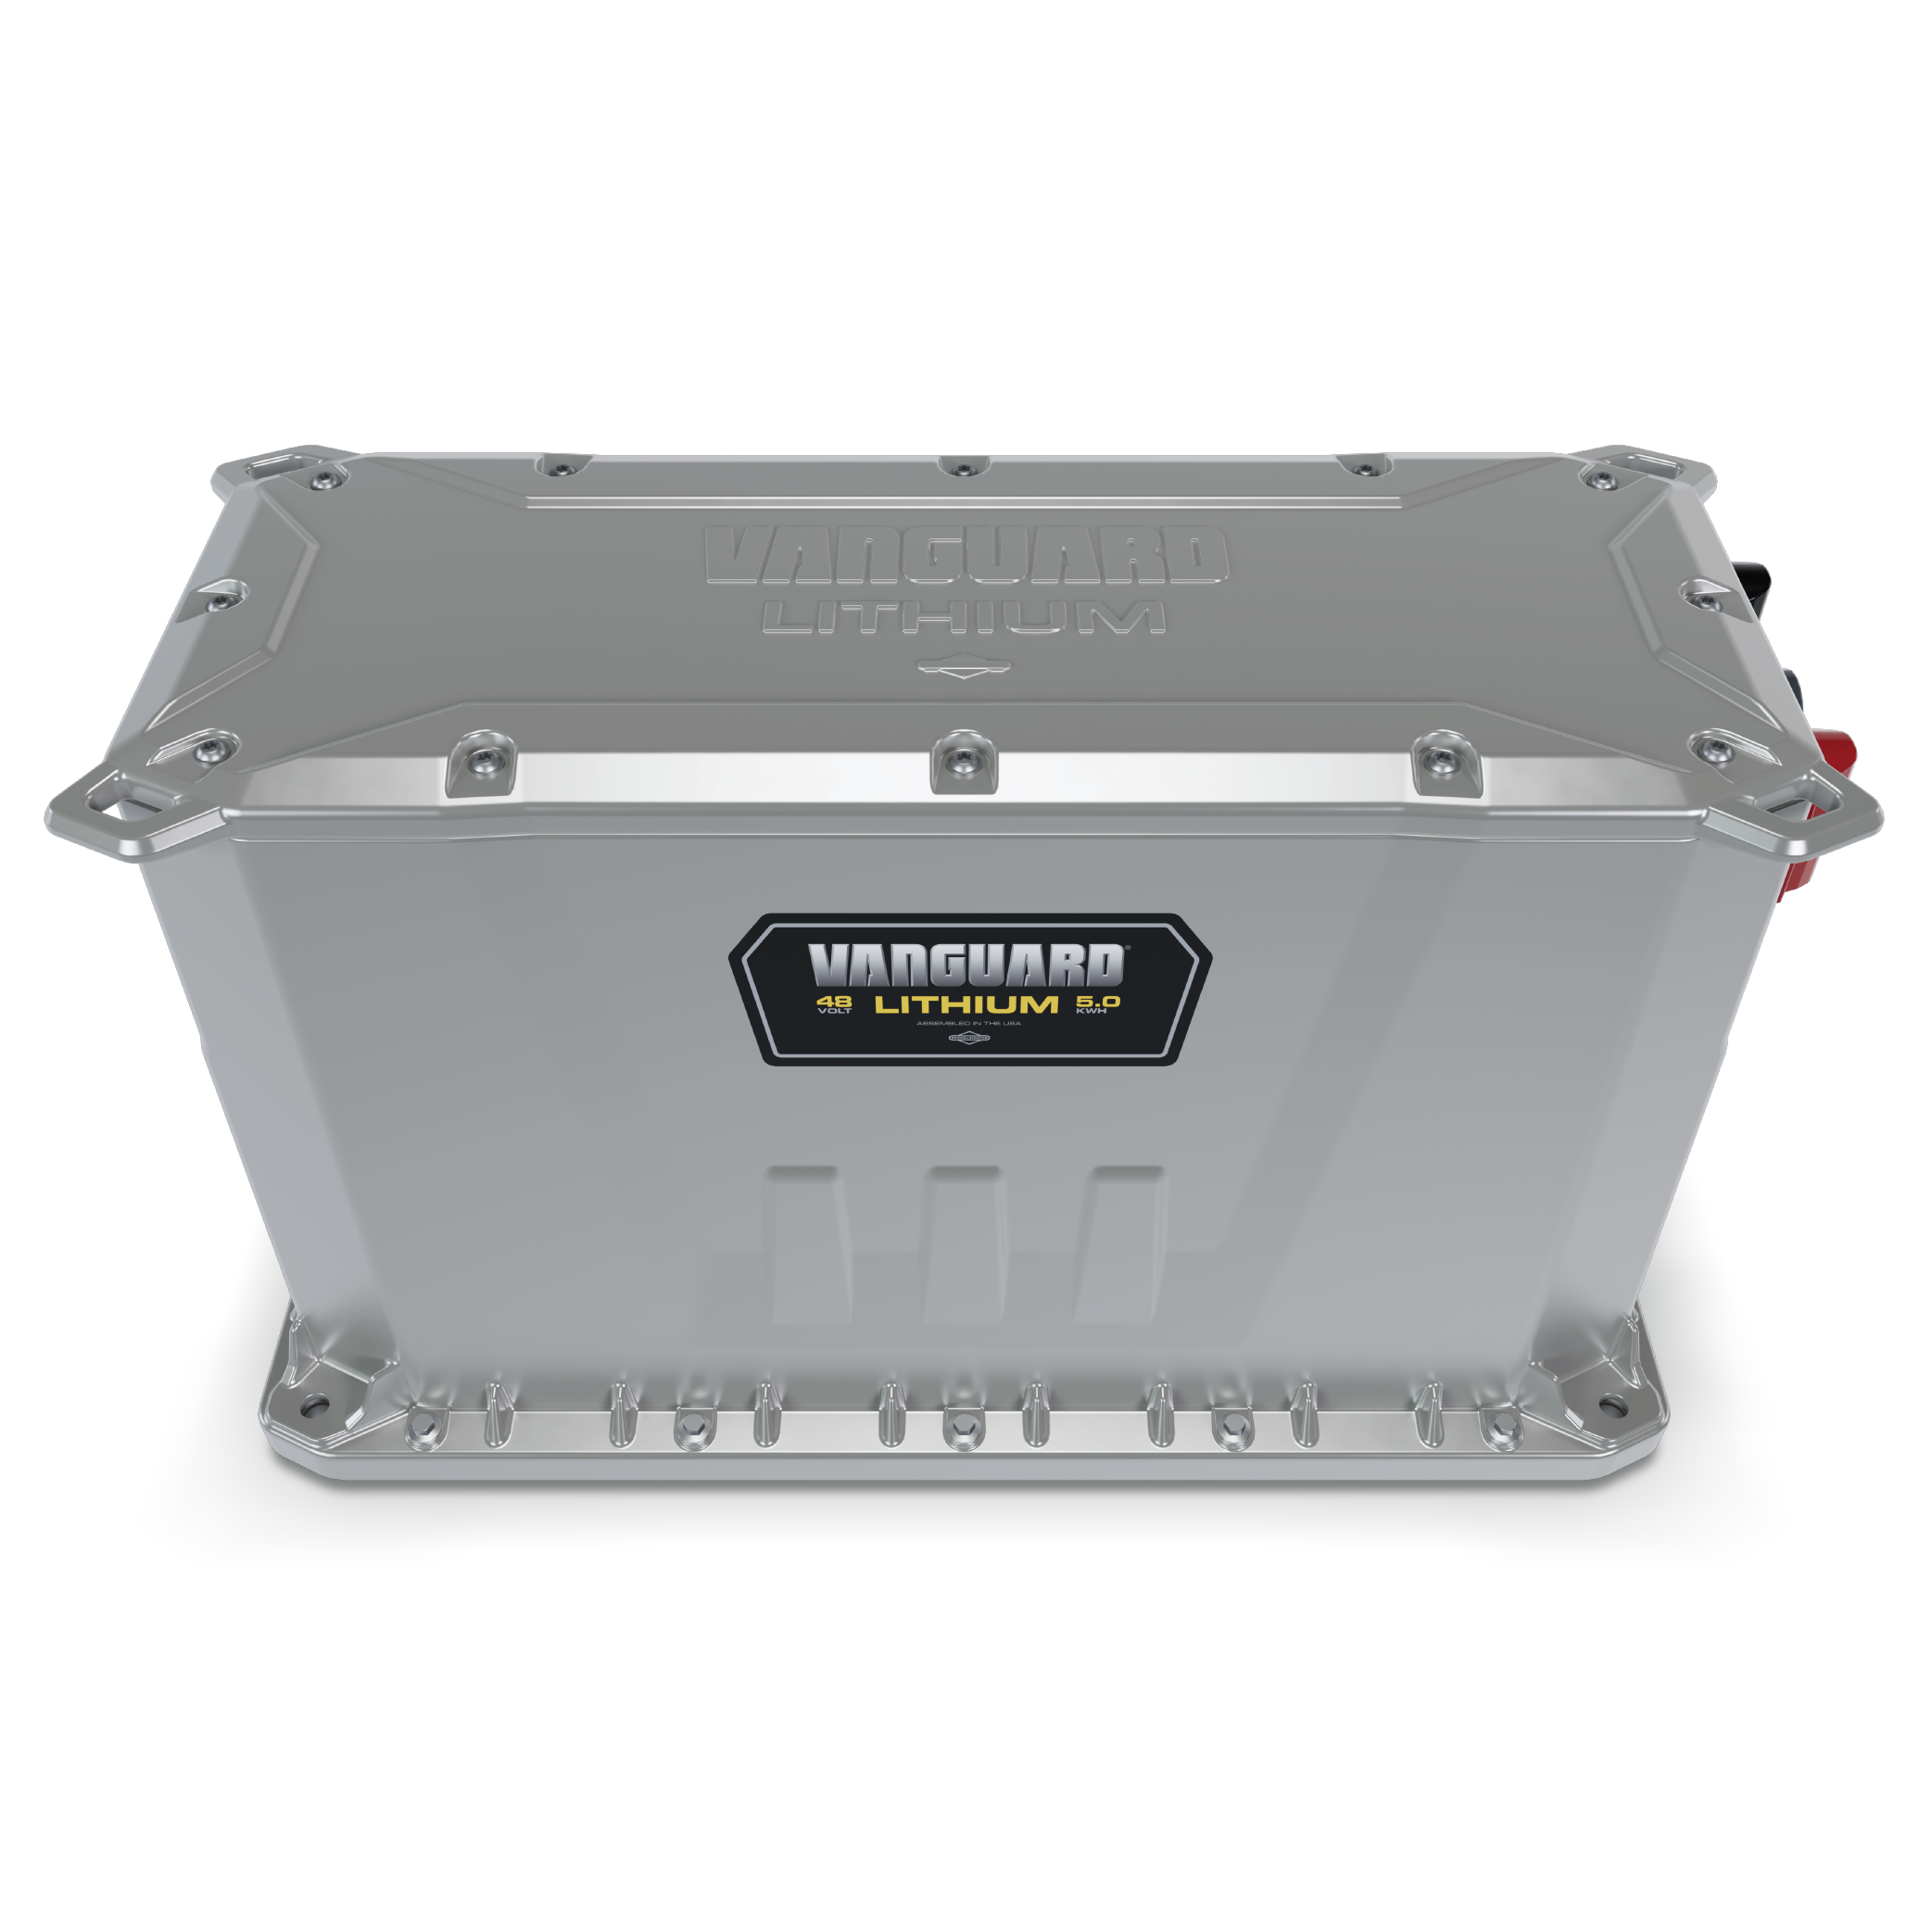  Vanguard commercial lithium-ion battery pack